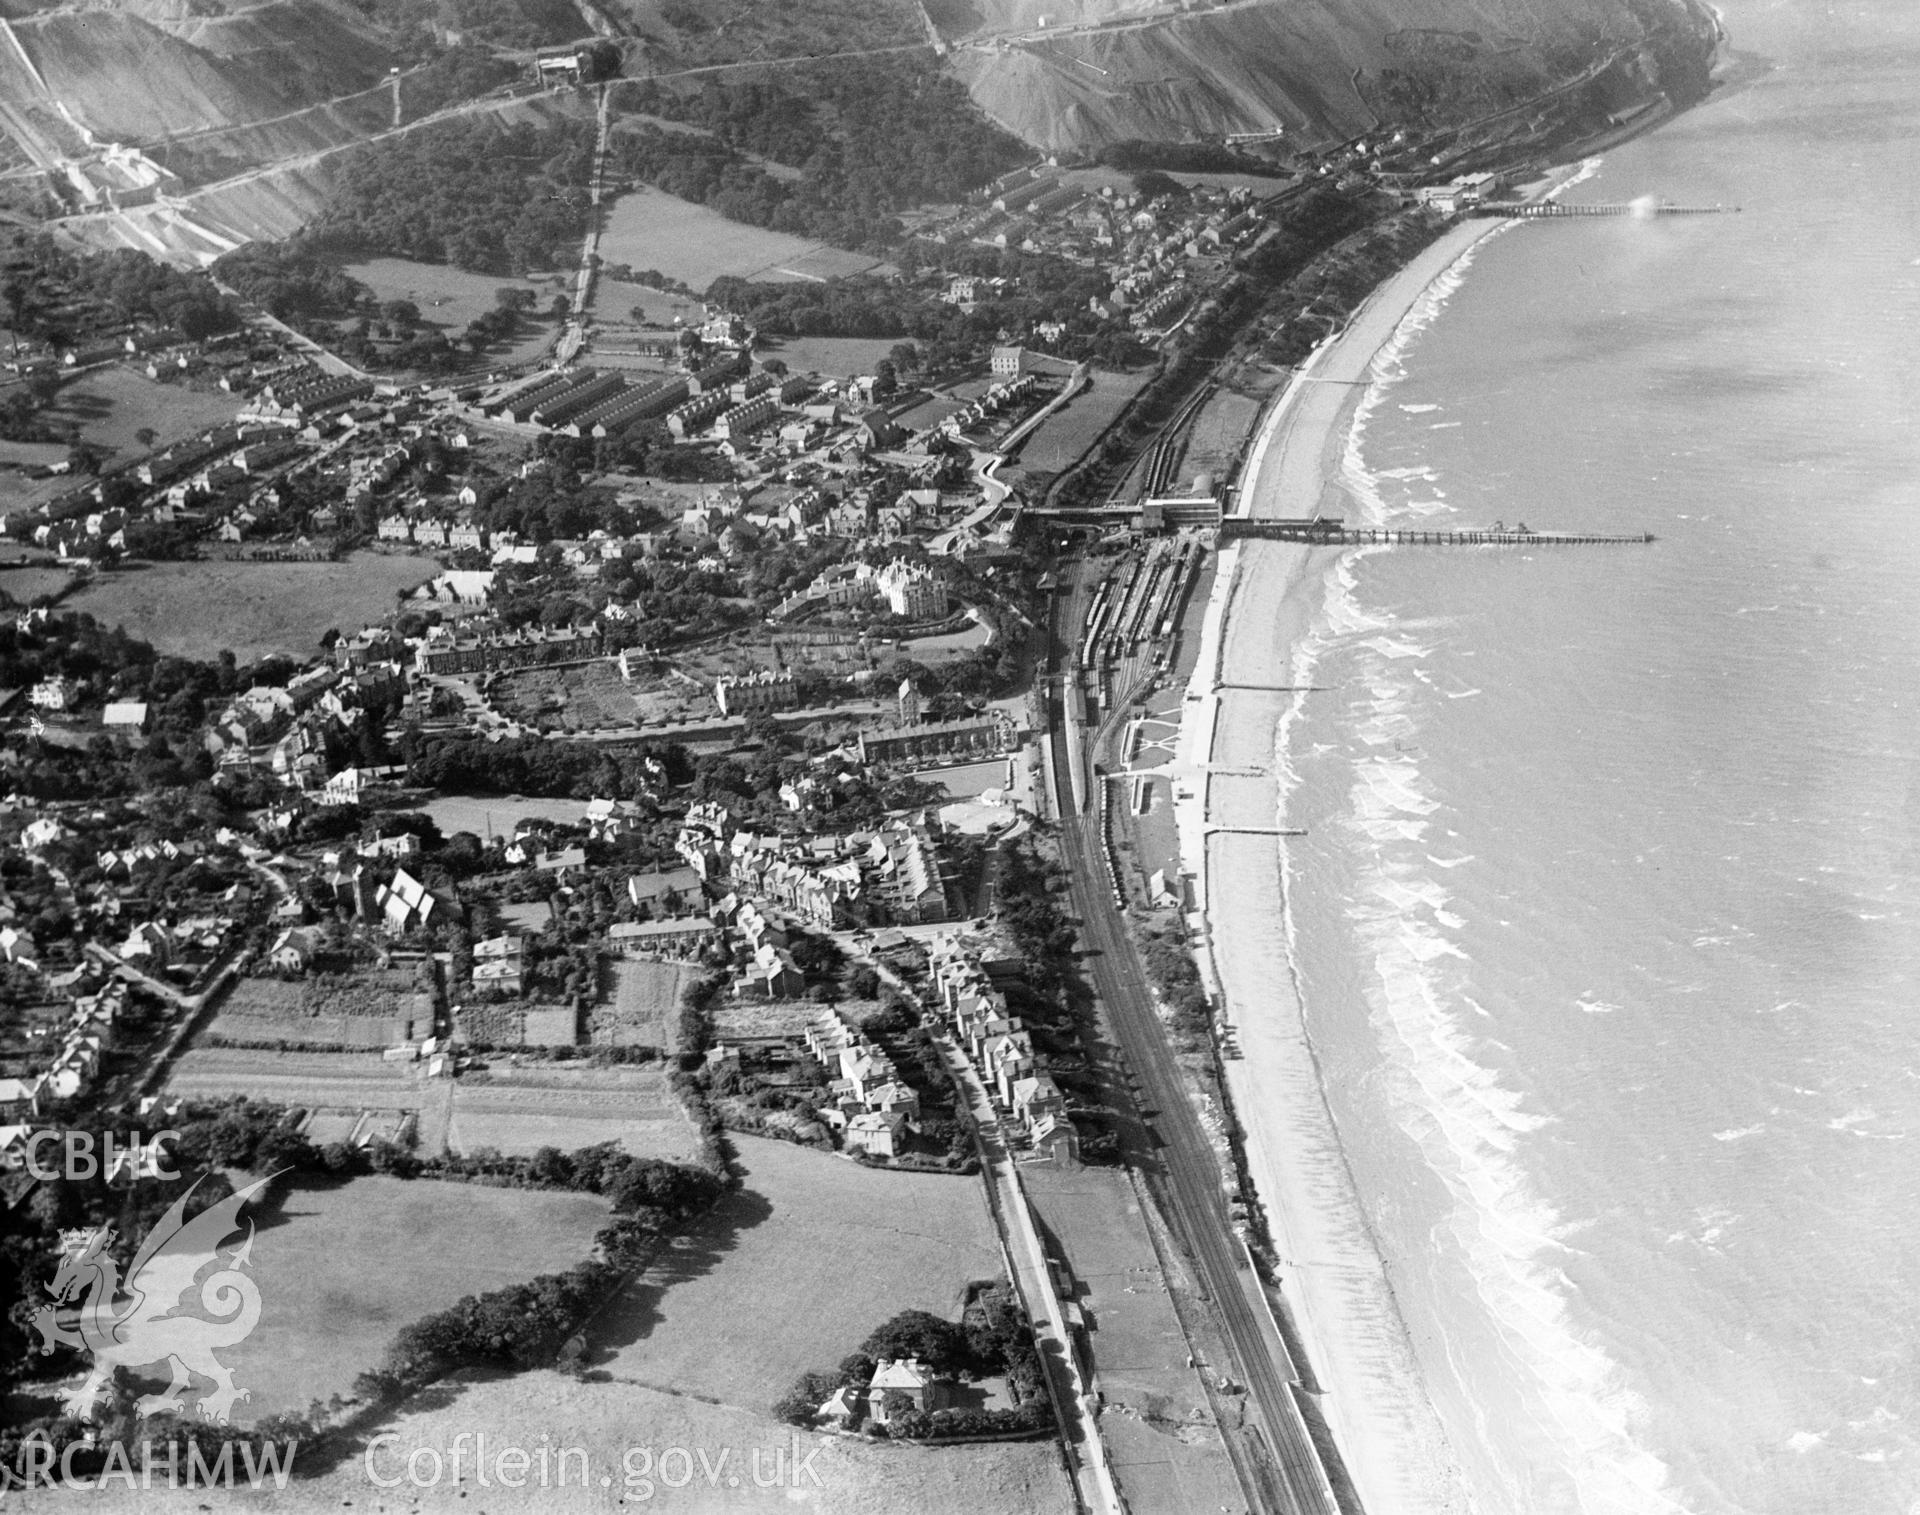 General view of Penmaenmawr, oblique aerial view. 5?x4? black and white glass plate negative.